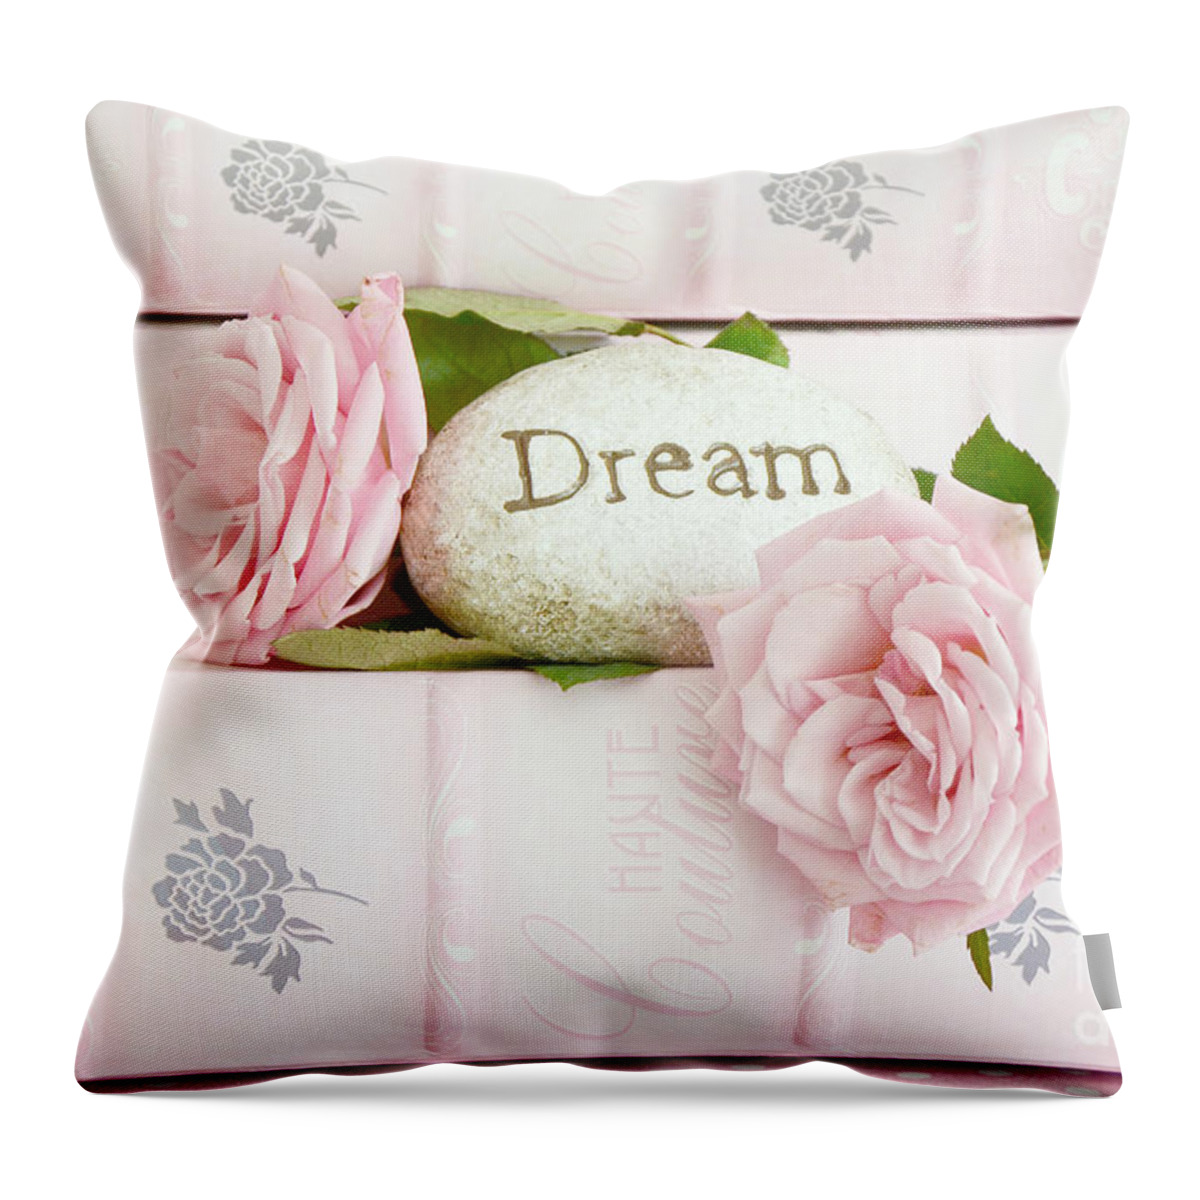 Dream Throw Pillow featuring the photograph Shabby Chic Cottage Pink Roses on Pink Books - Romantic Inspirational Dream Roses by Kathy Fornal